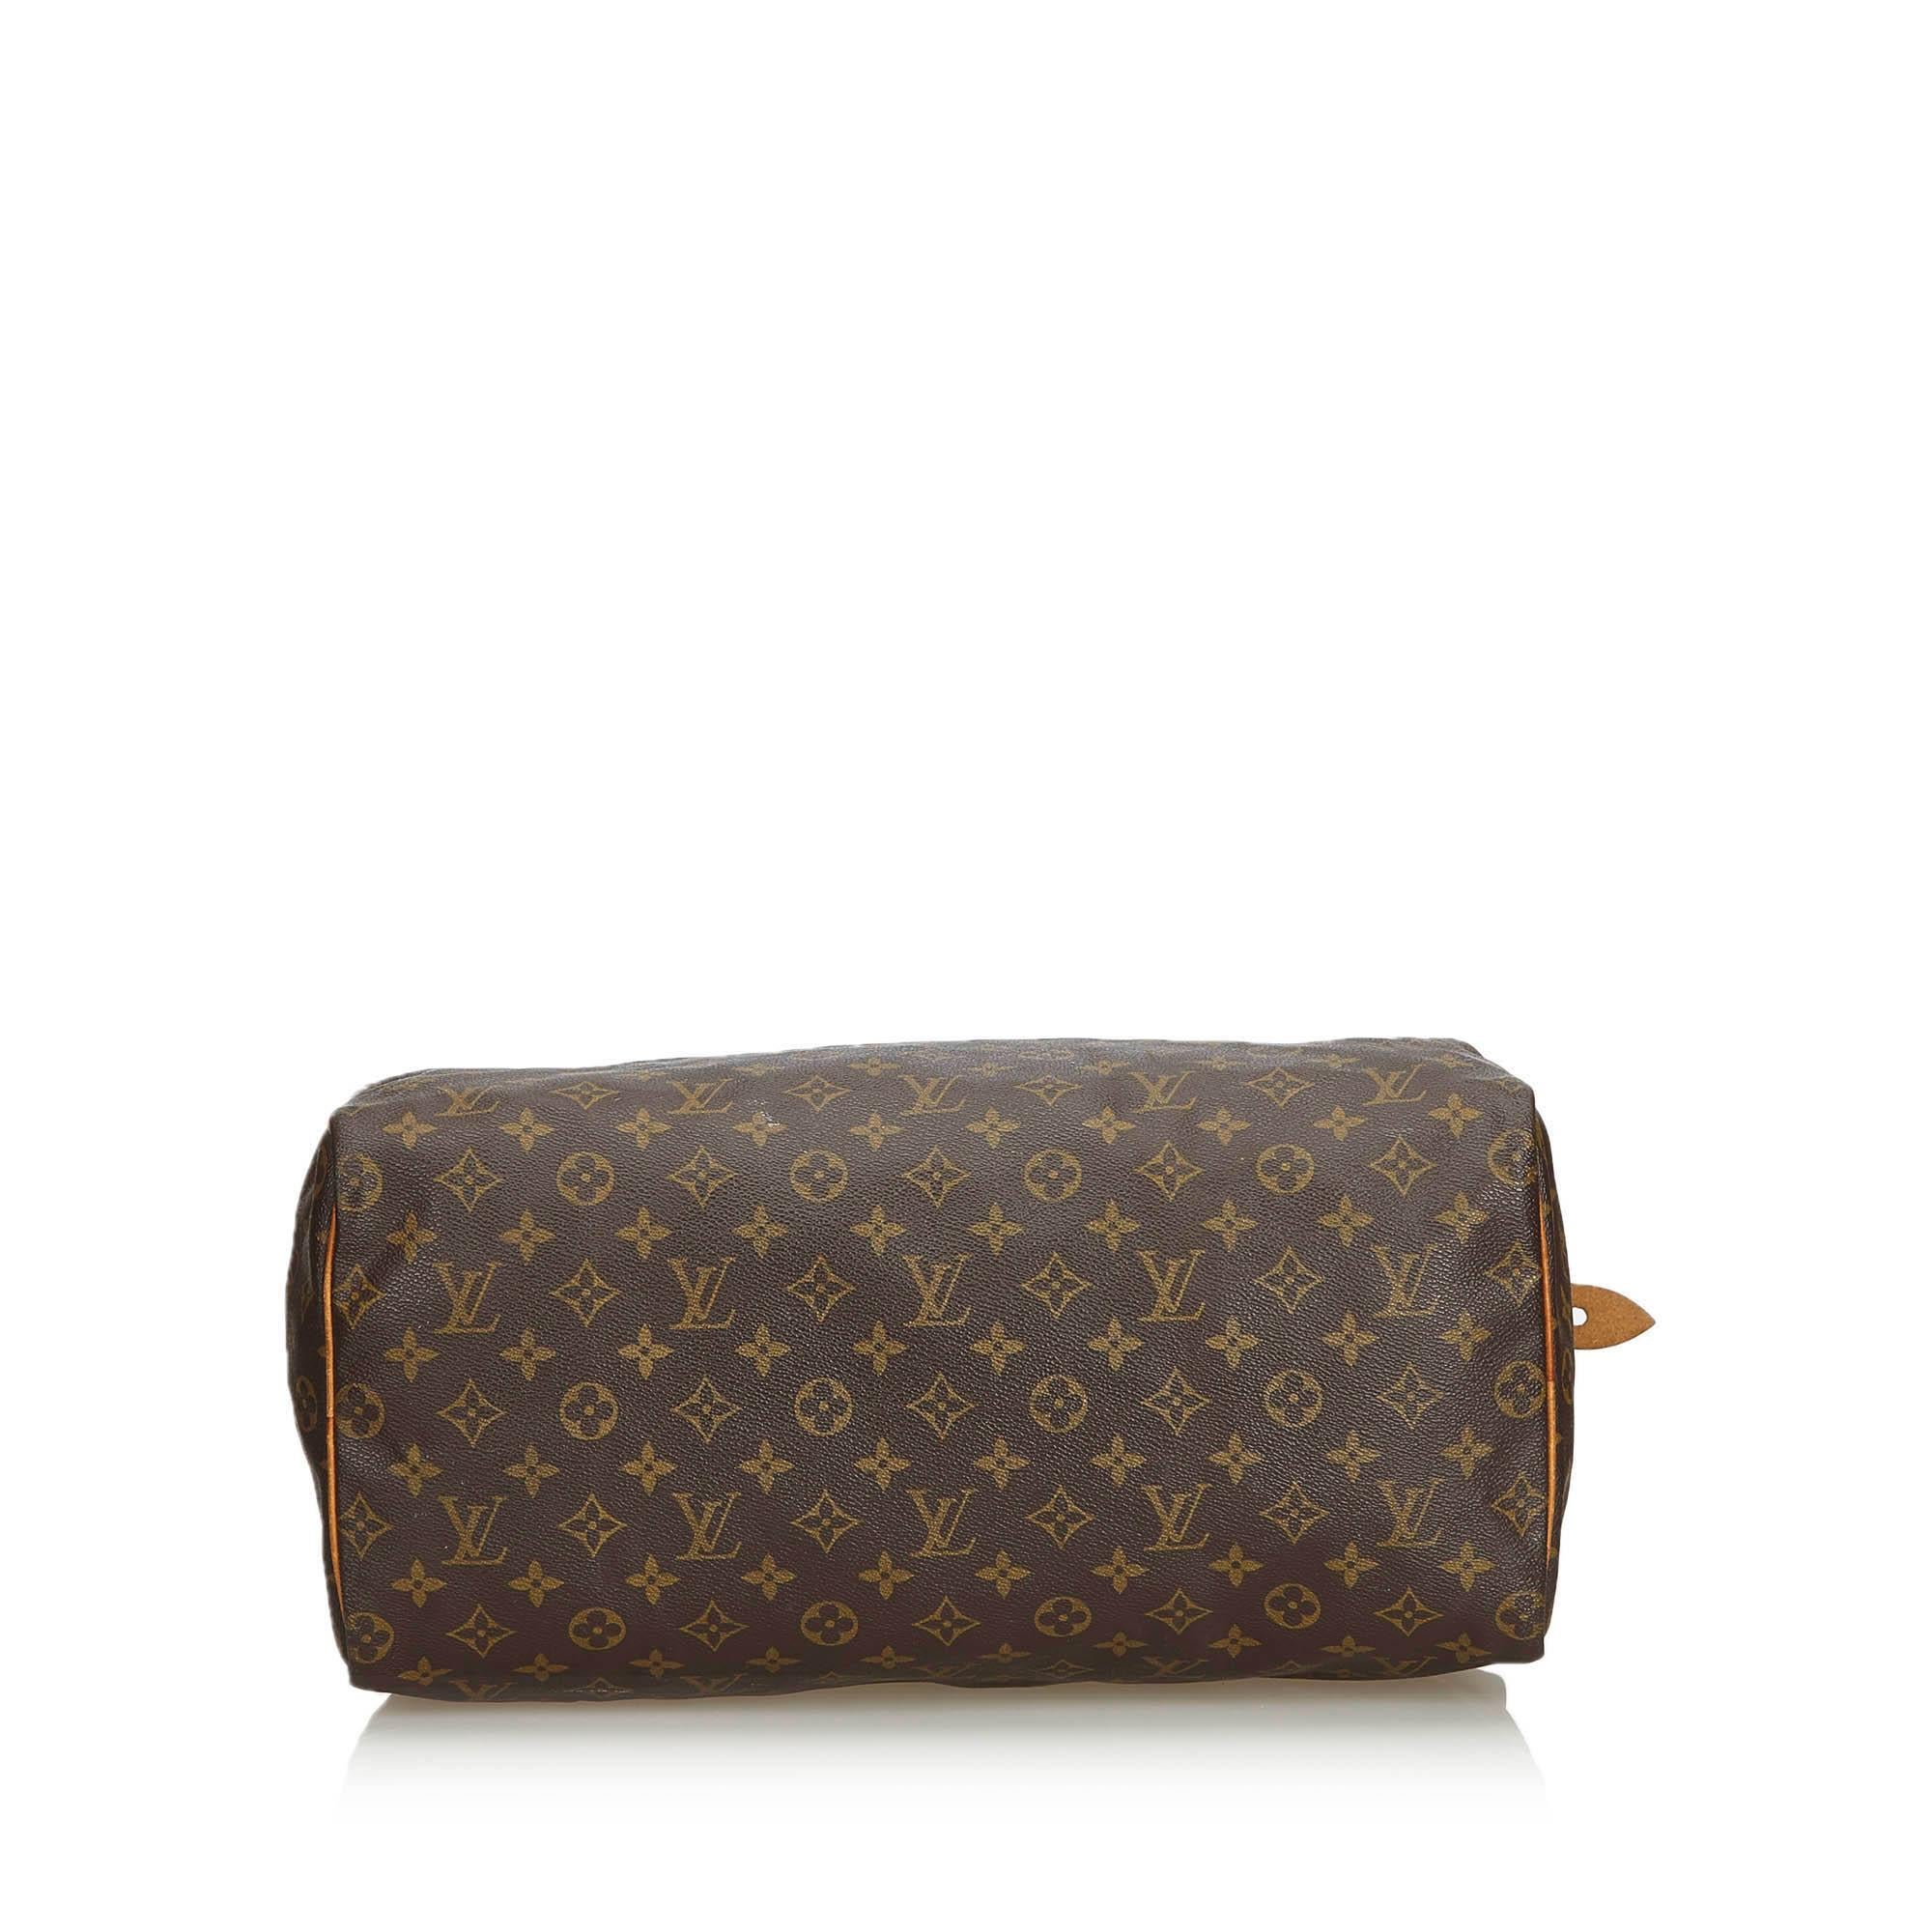 Vintage Authentic Louis Vuitton Brown Monogram Canvas Speedy 40 France LARGE  In Good Condition For Sale In Orlando, FL